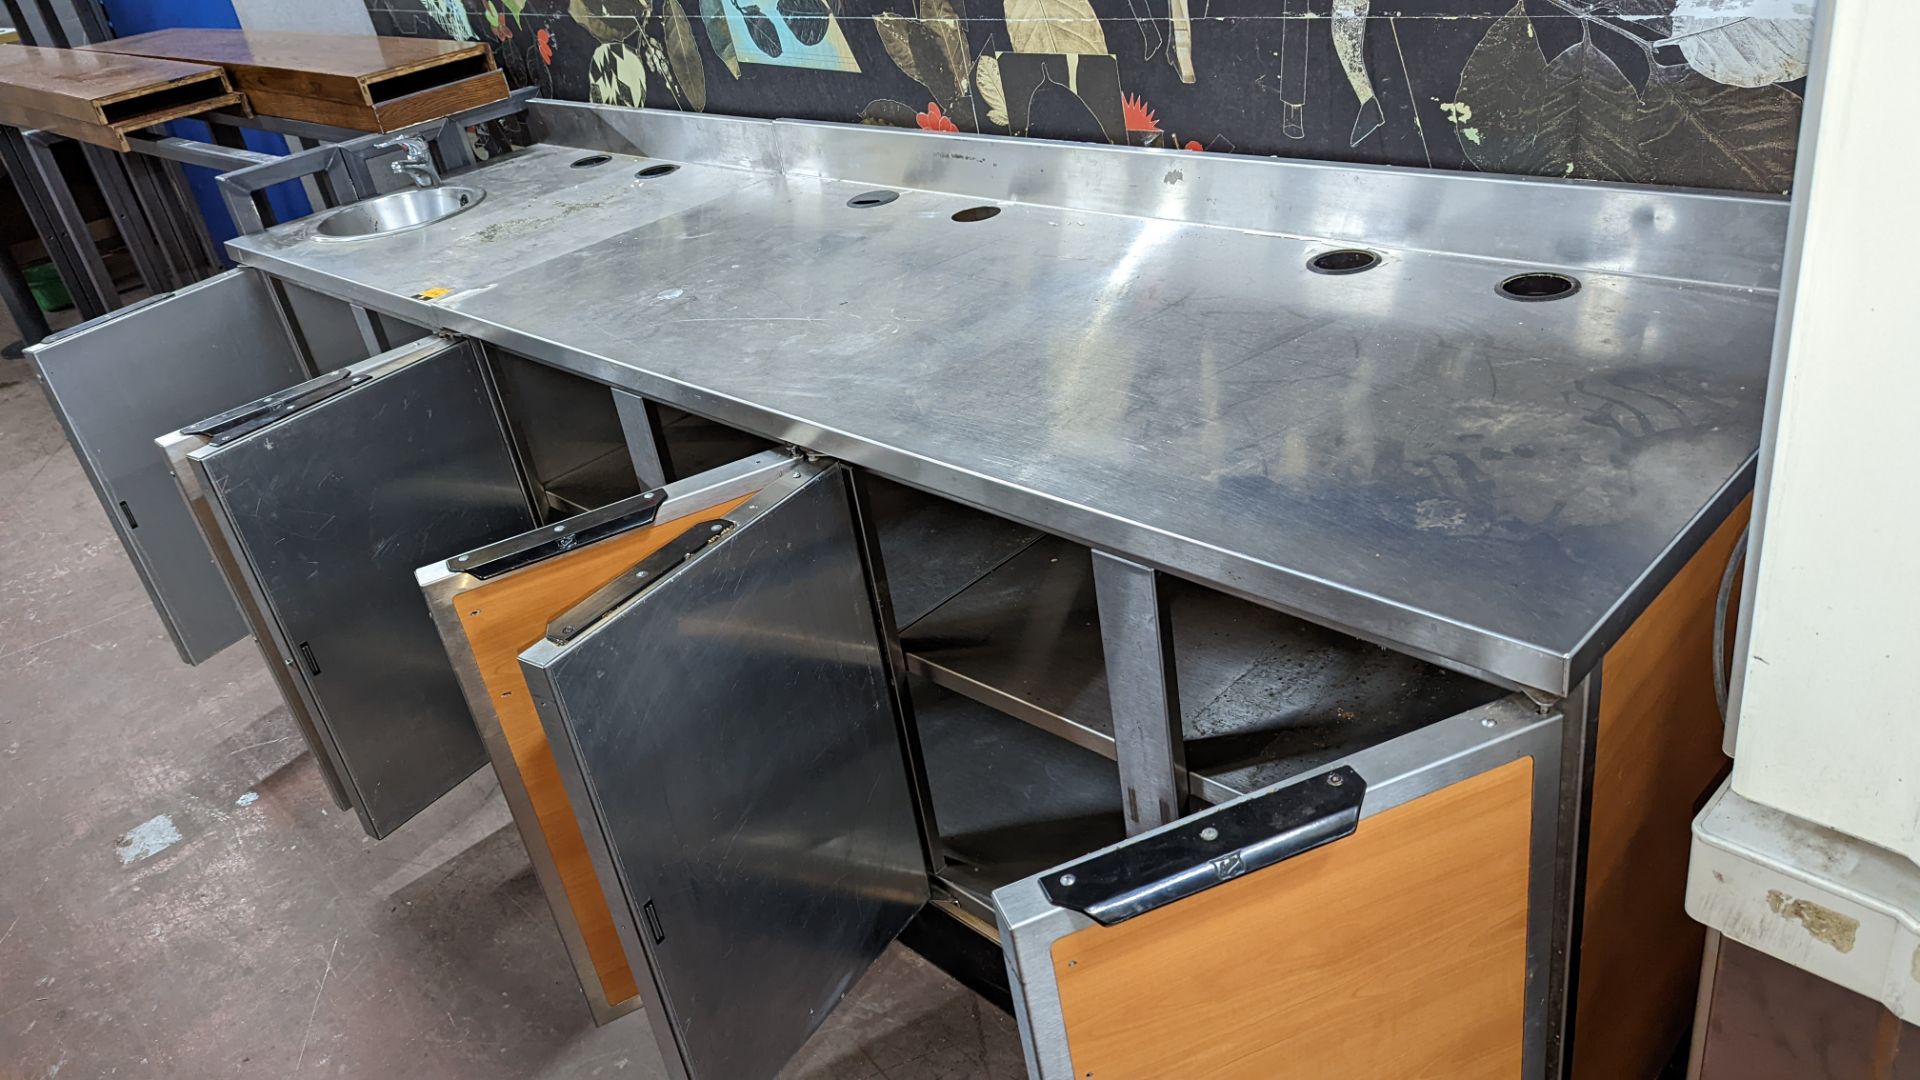 2 matching counters with deep stainless steel tops & storage below, one of which incorporates a basi - Image 8 of 8